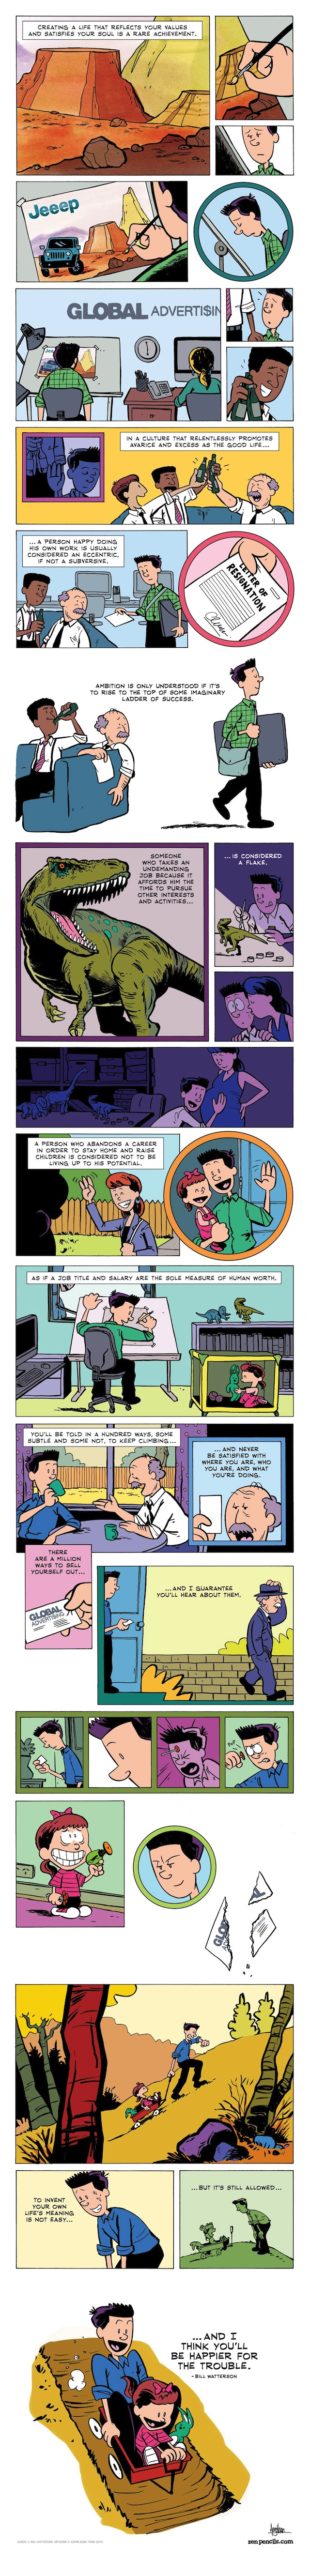 Calvin & Hobbes Creator’s Life Lessons Become Beautiful New Comic